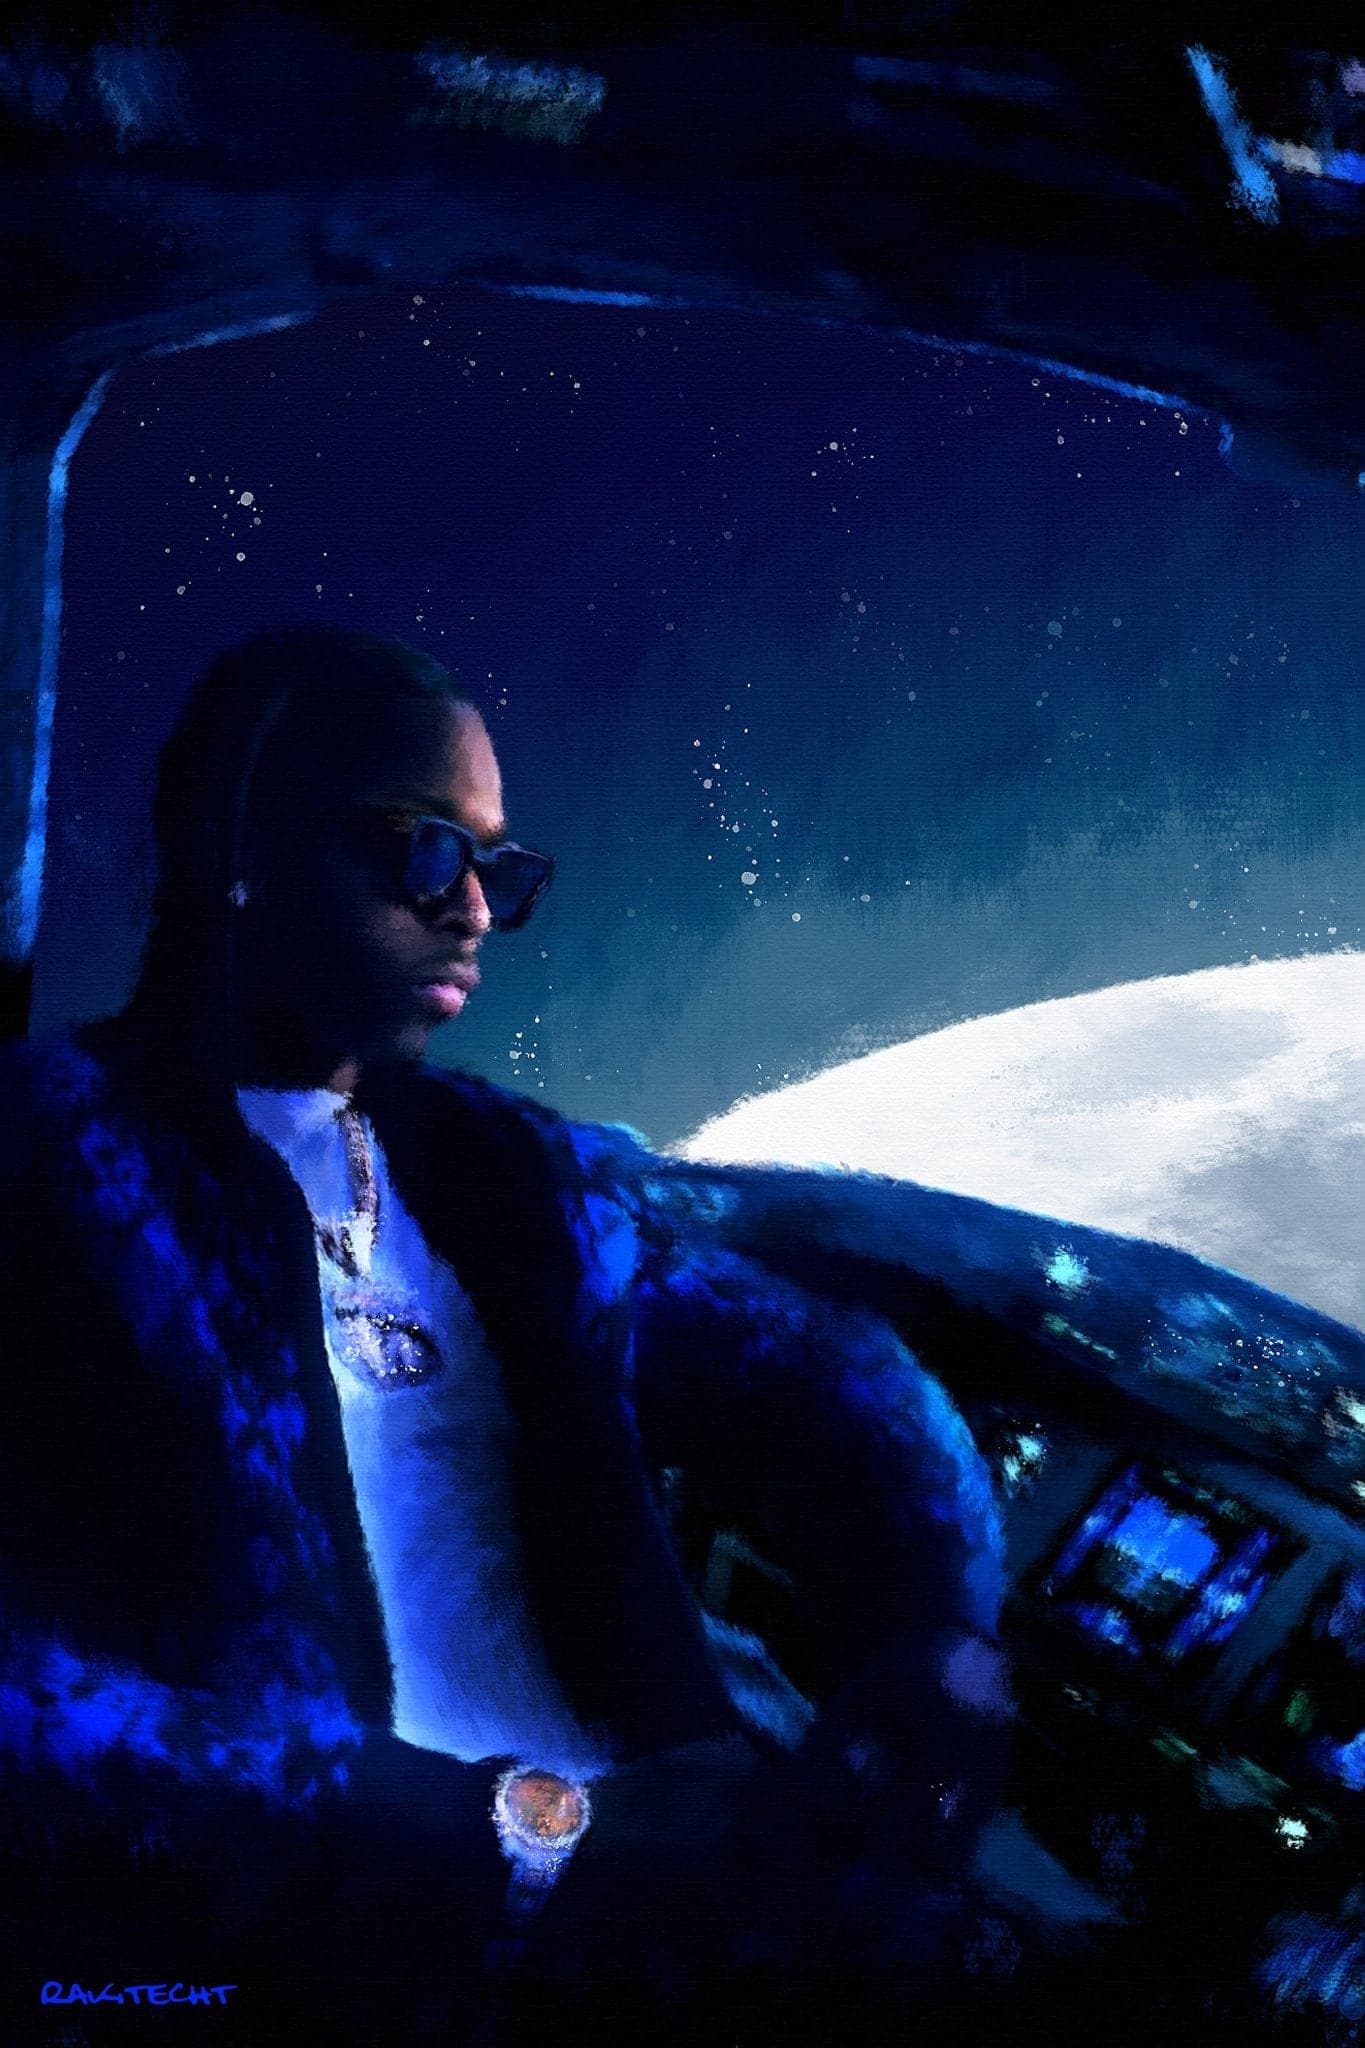 A digital painting of 2 Chainz sitting in a car at night with the moon in the background - Pop Smoke